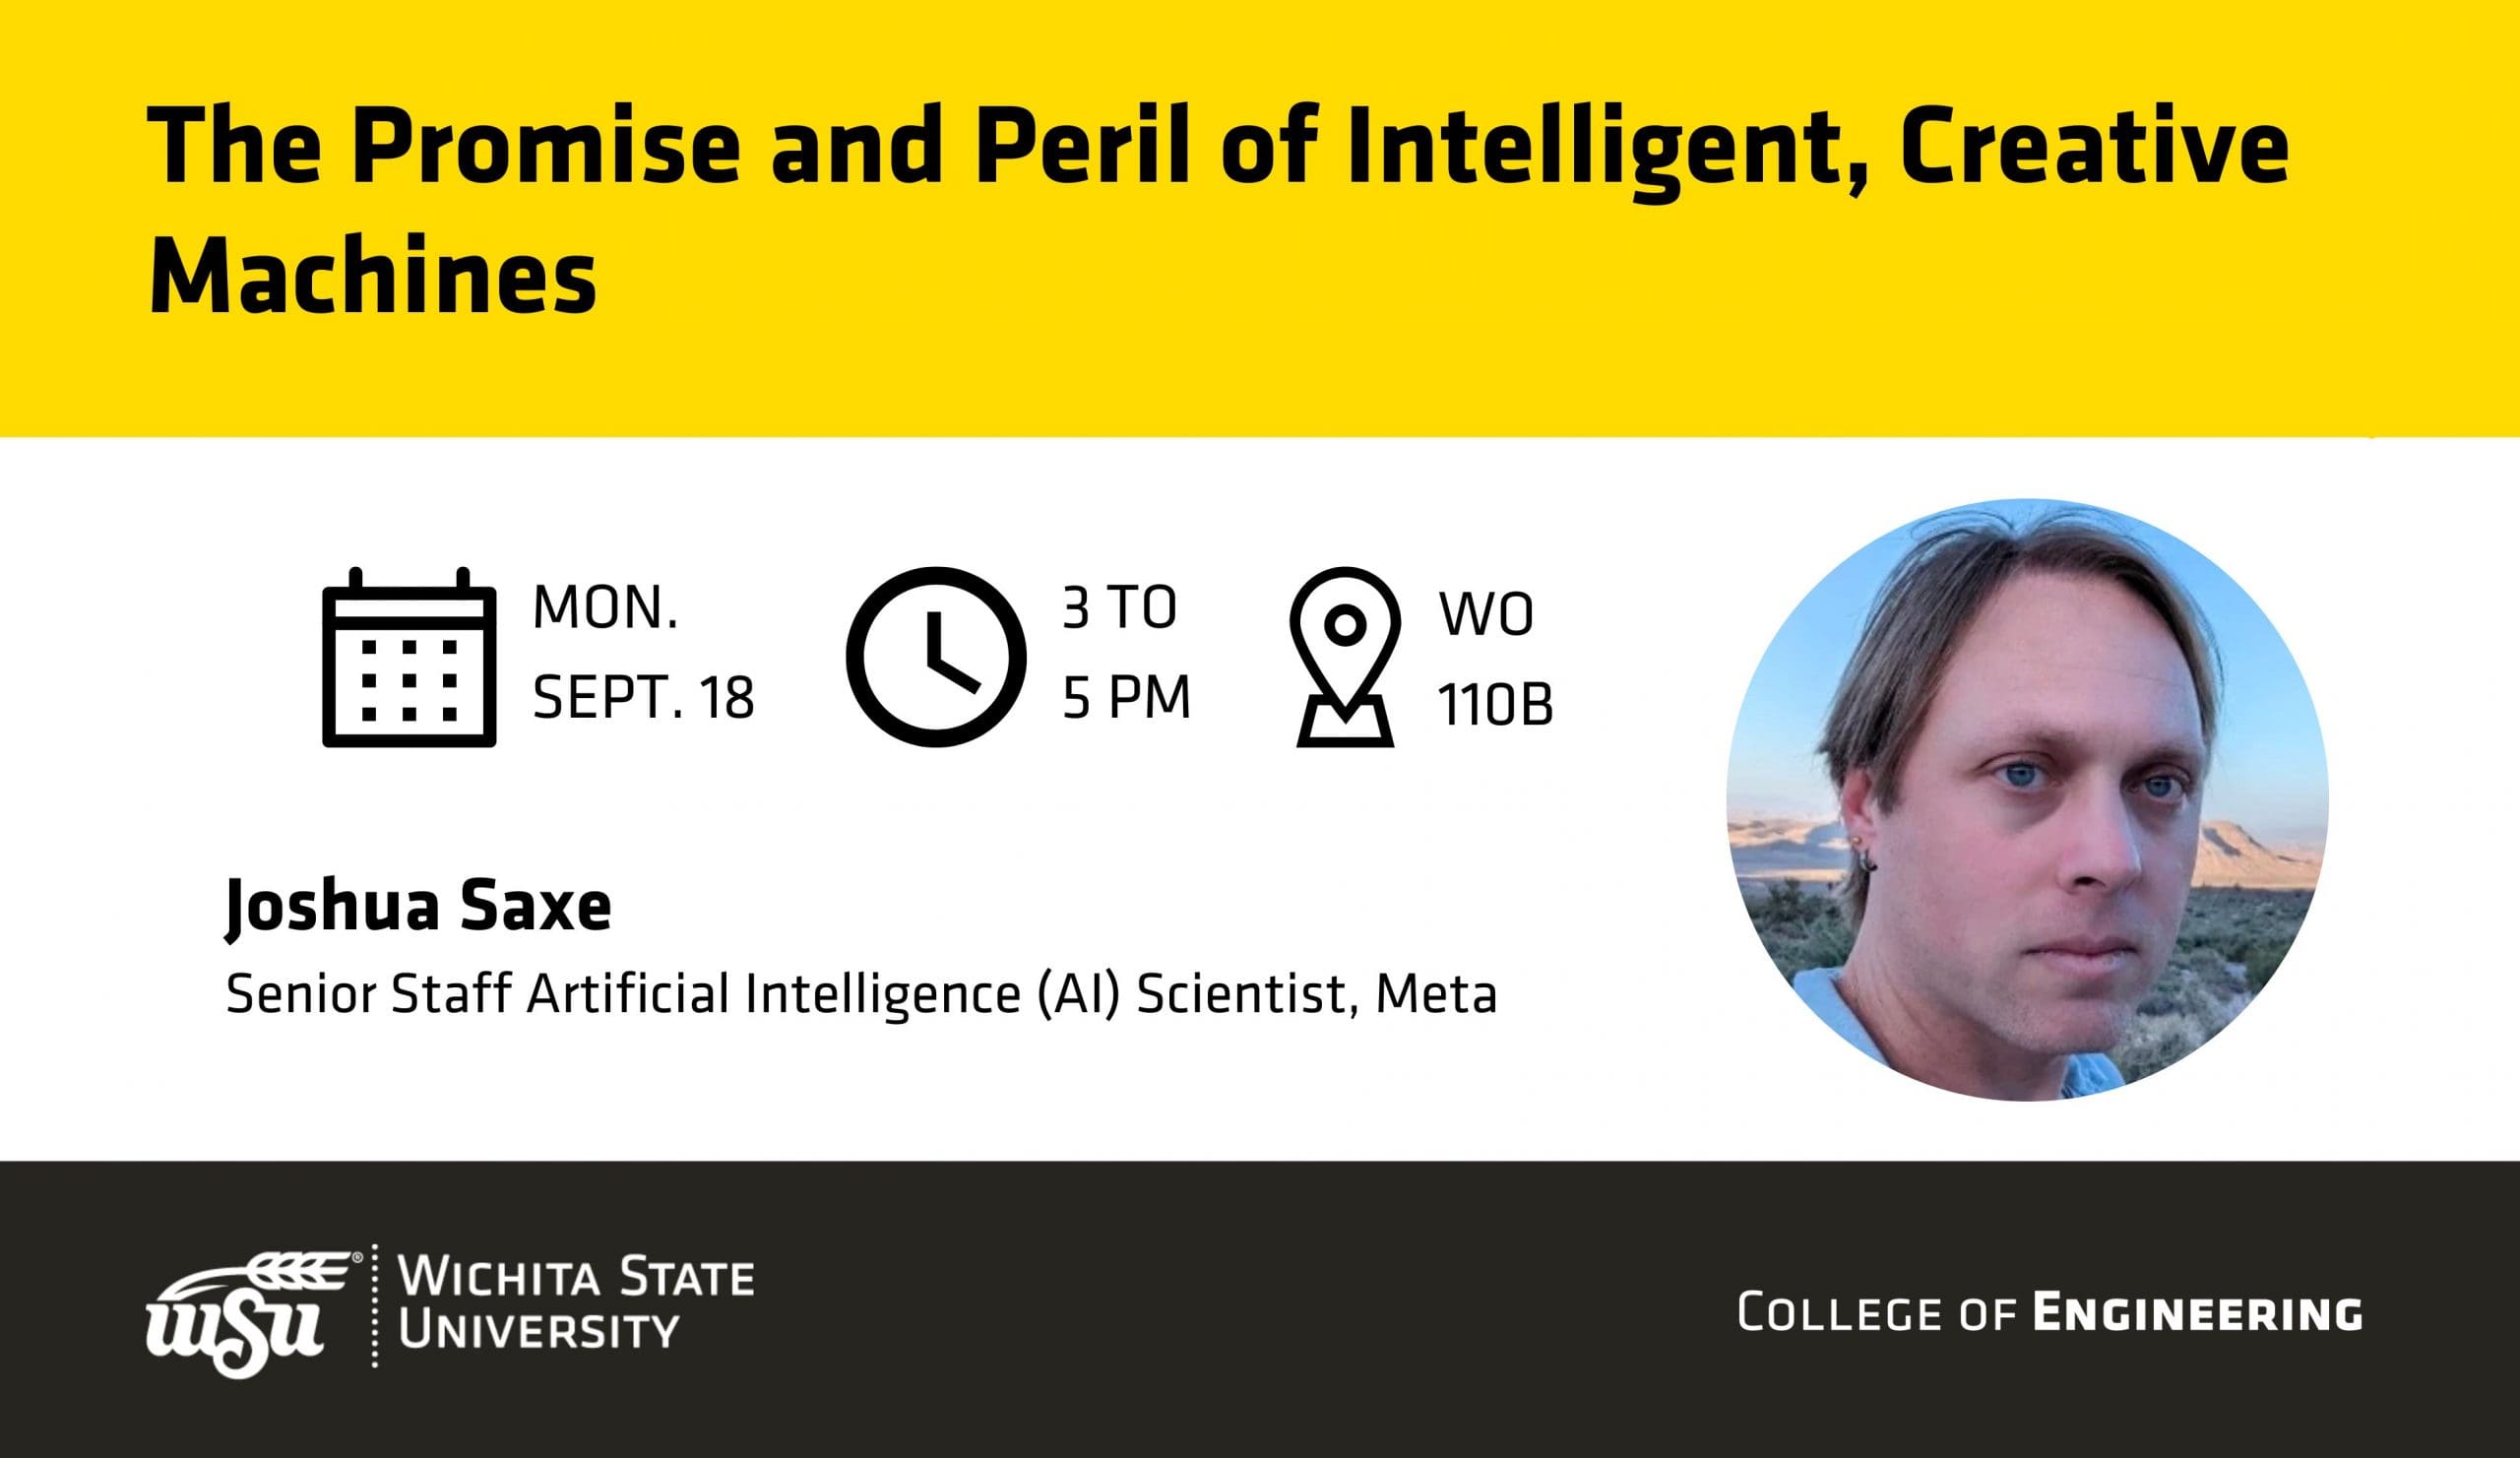 The Promise and Peril of Intelligent, Creative Machines | Mon., Sept. 18 | 3 to 5 pm | Woolsey Hall, 110B | Joshua Saxe, Senior Staff AI Scientist, Meta